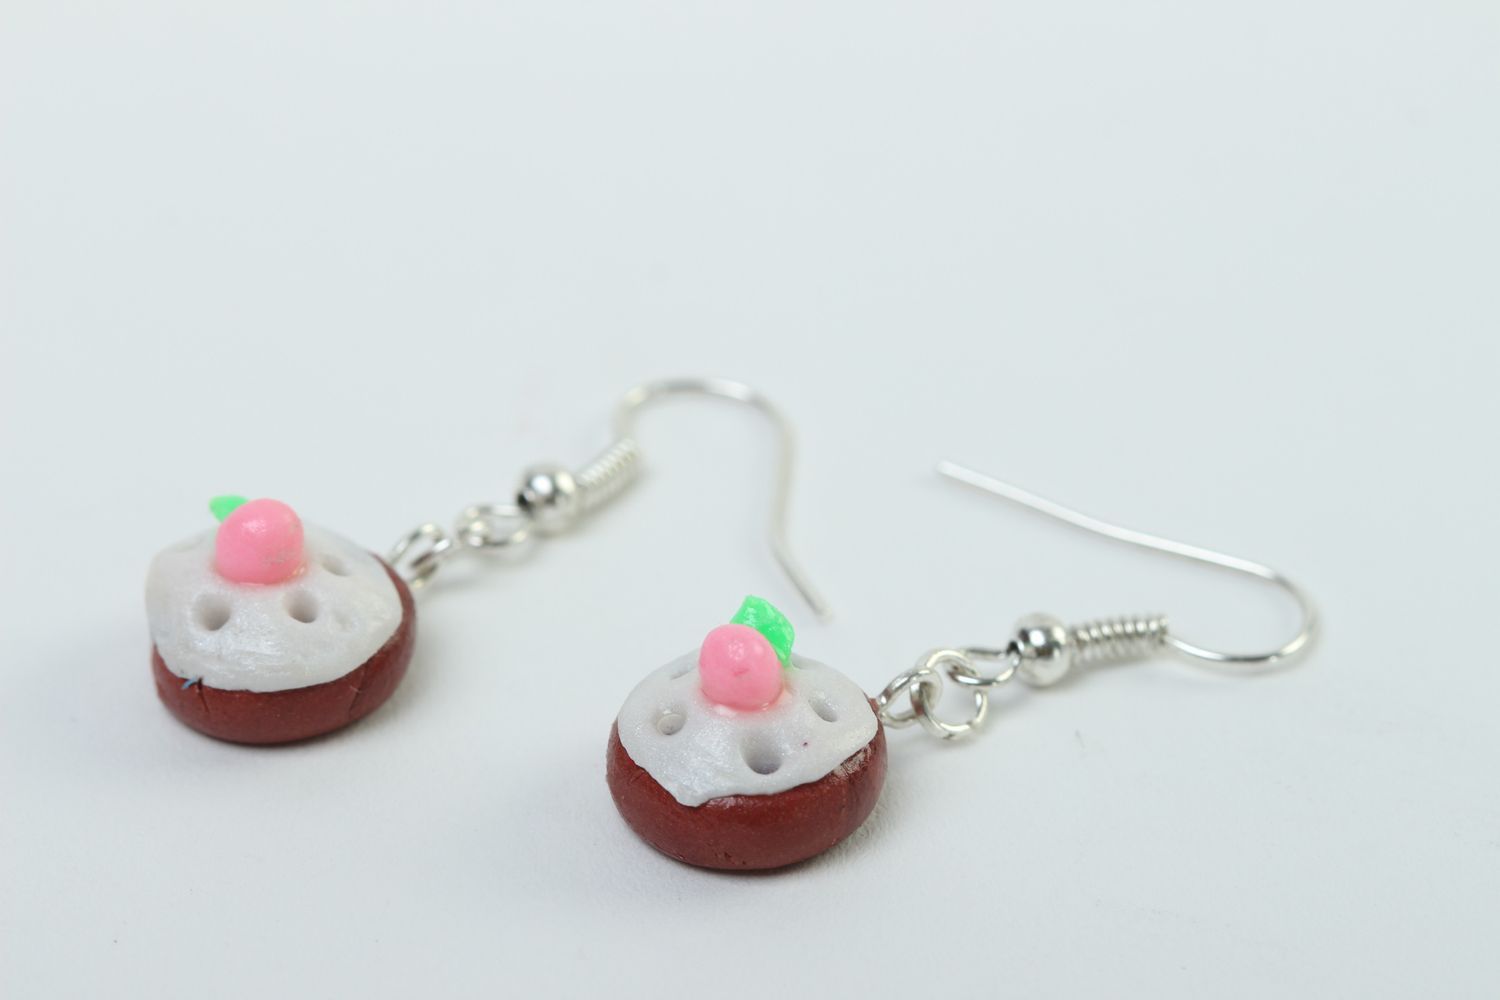 Stylish polymer clay earrings with charms handmade accessories for stylish girl photo 3